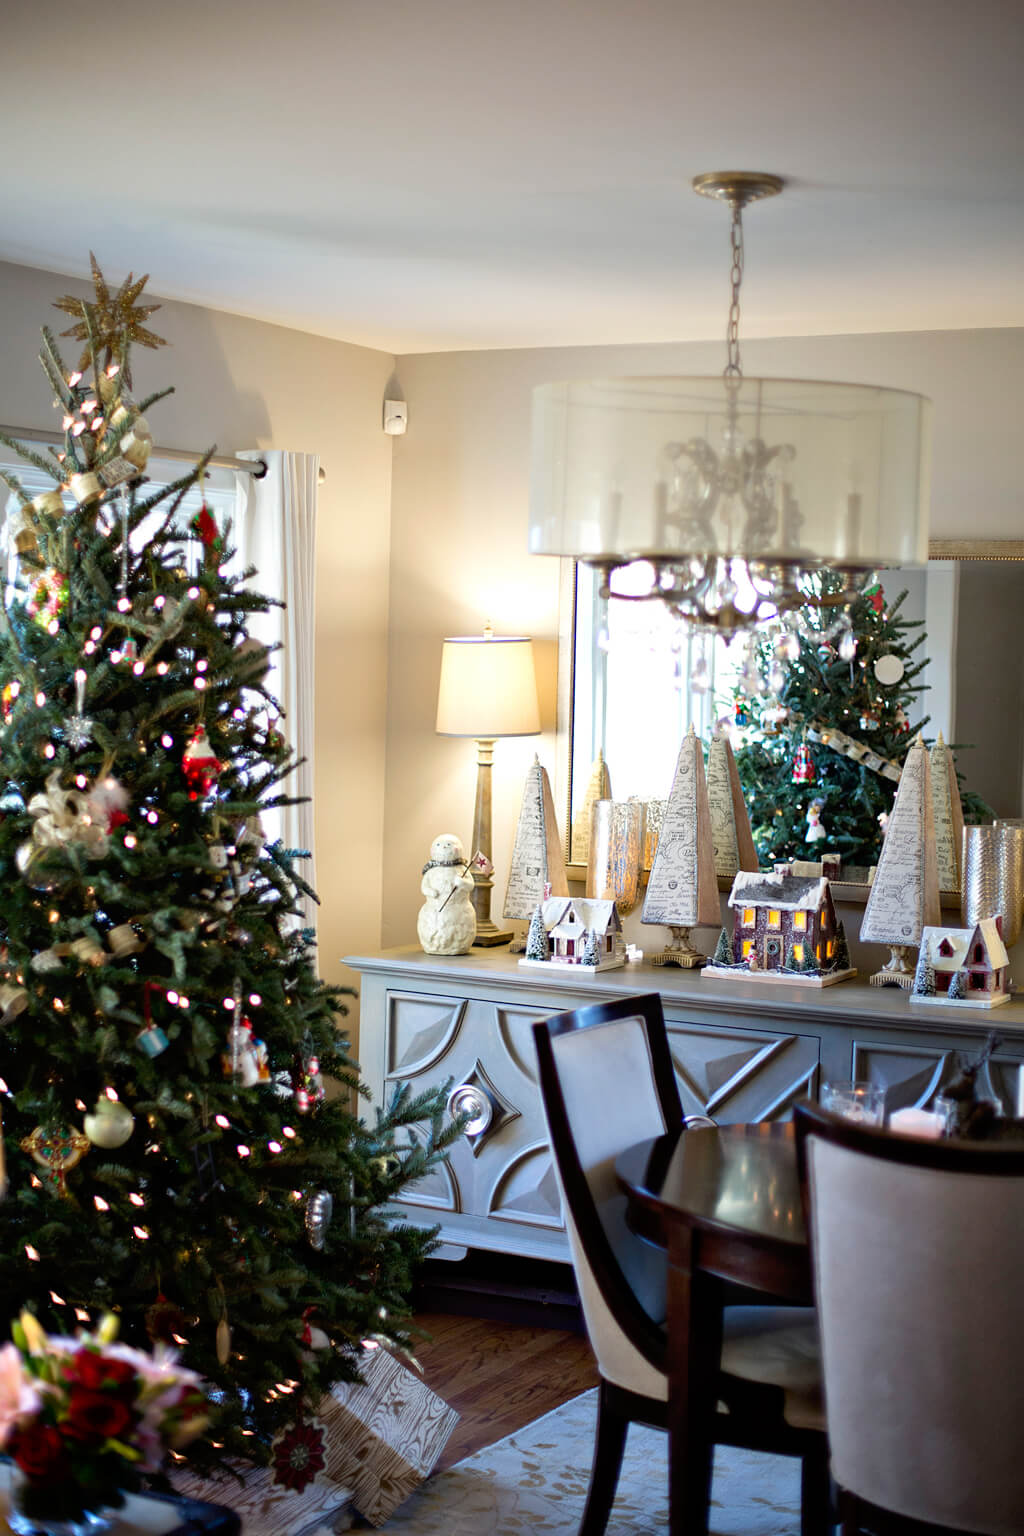 Holiday Home Tour // Christmas Decor // www.https://www.thehisfor.com